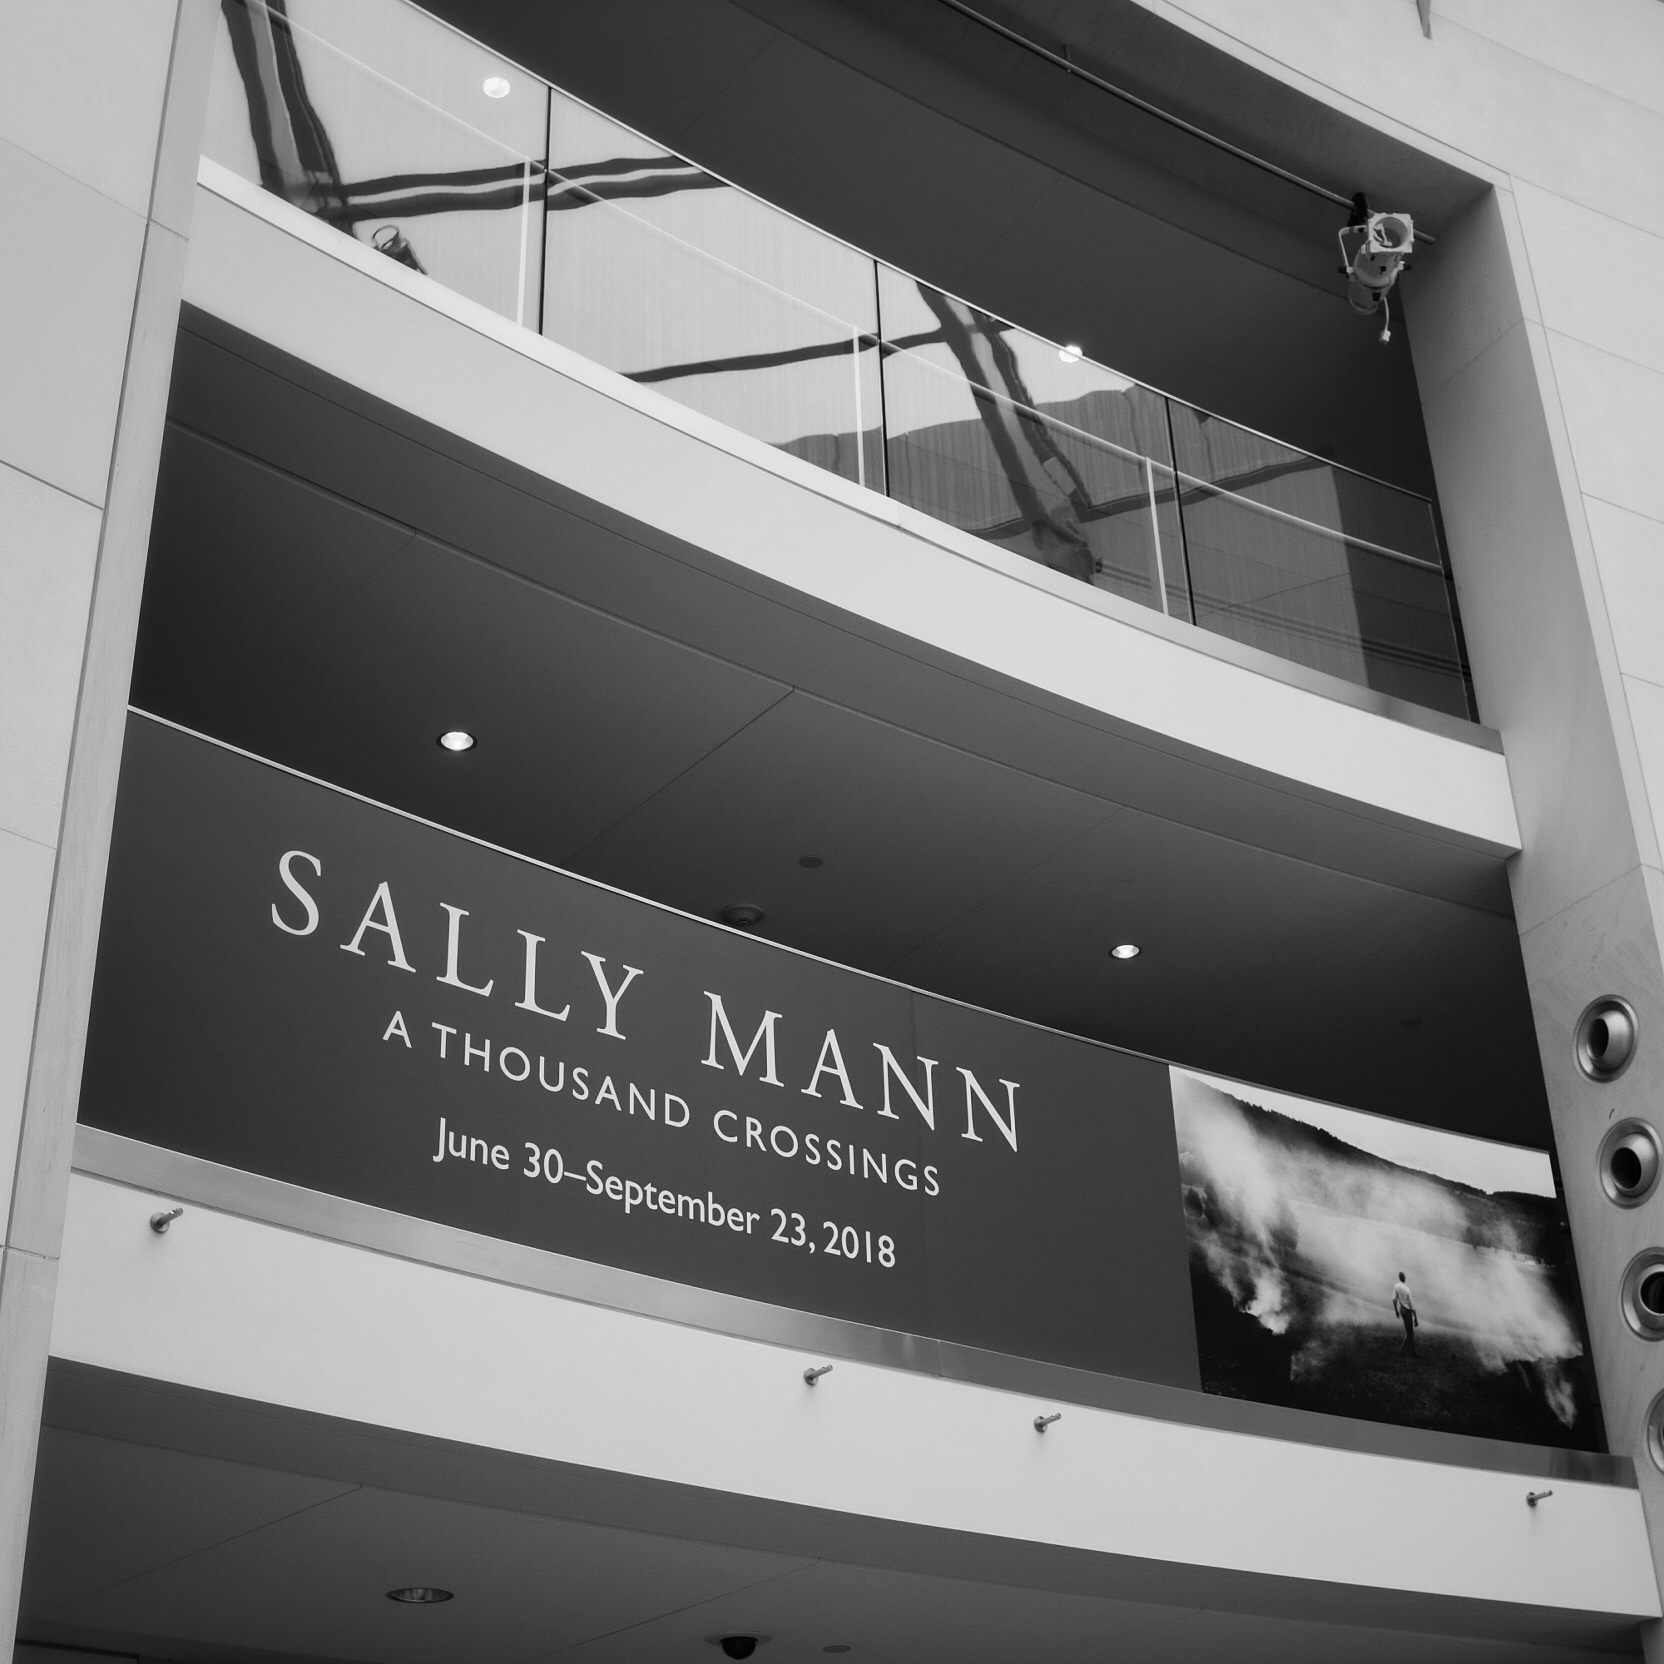 Sally Mann: A Thousand Crossings, Peabody Essex Museum: For more than forty years, Sally Mann has made experimental and hauntingly beautiful images that have made her one of the country’s most influential and distinguished photographers. The artist’s first major traveling exhibition, Sally Mann: A Thousand Crossings, explores themes of family, memory, mortality, and home as well as the Southern landscape as repository of personal and collective memory. Some 115 photographs — many of which have not been exhibited or published previously — offer a sweeping overview of Mann’s artistic achievement, vision, and drive.